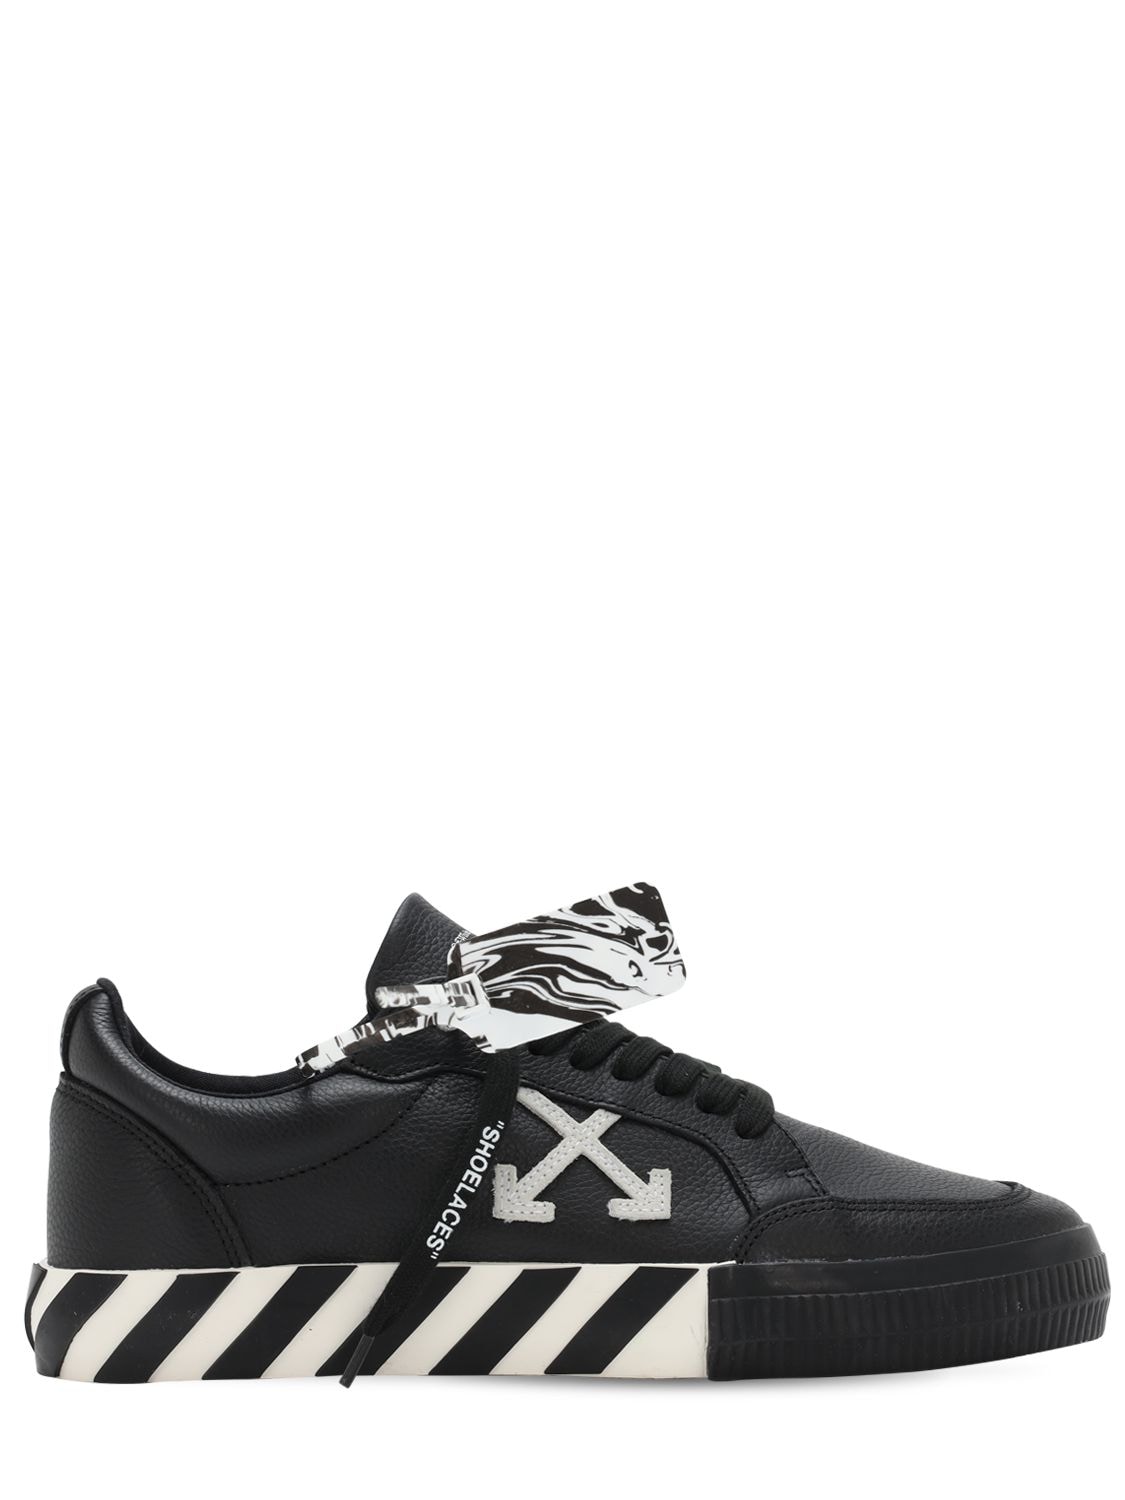 OFF-WHITE VULCANIZED LEATHER LOW TOP SNEAKERS